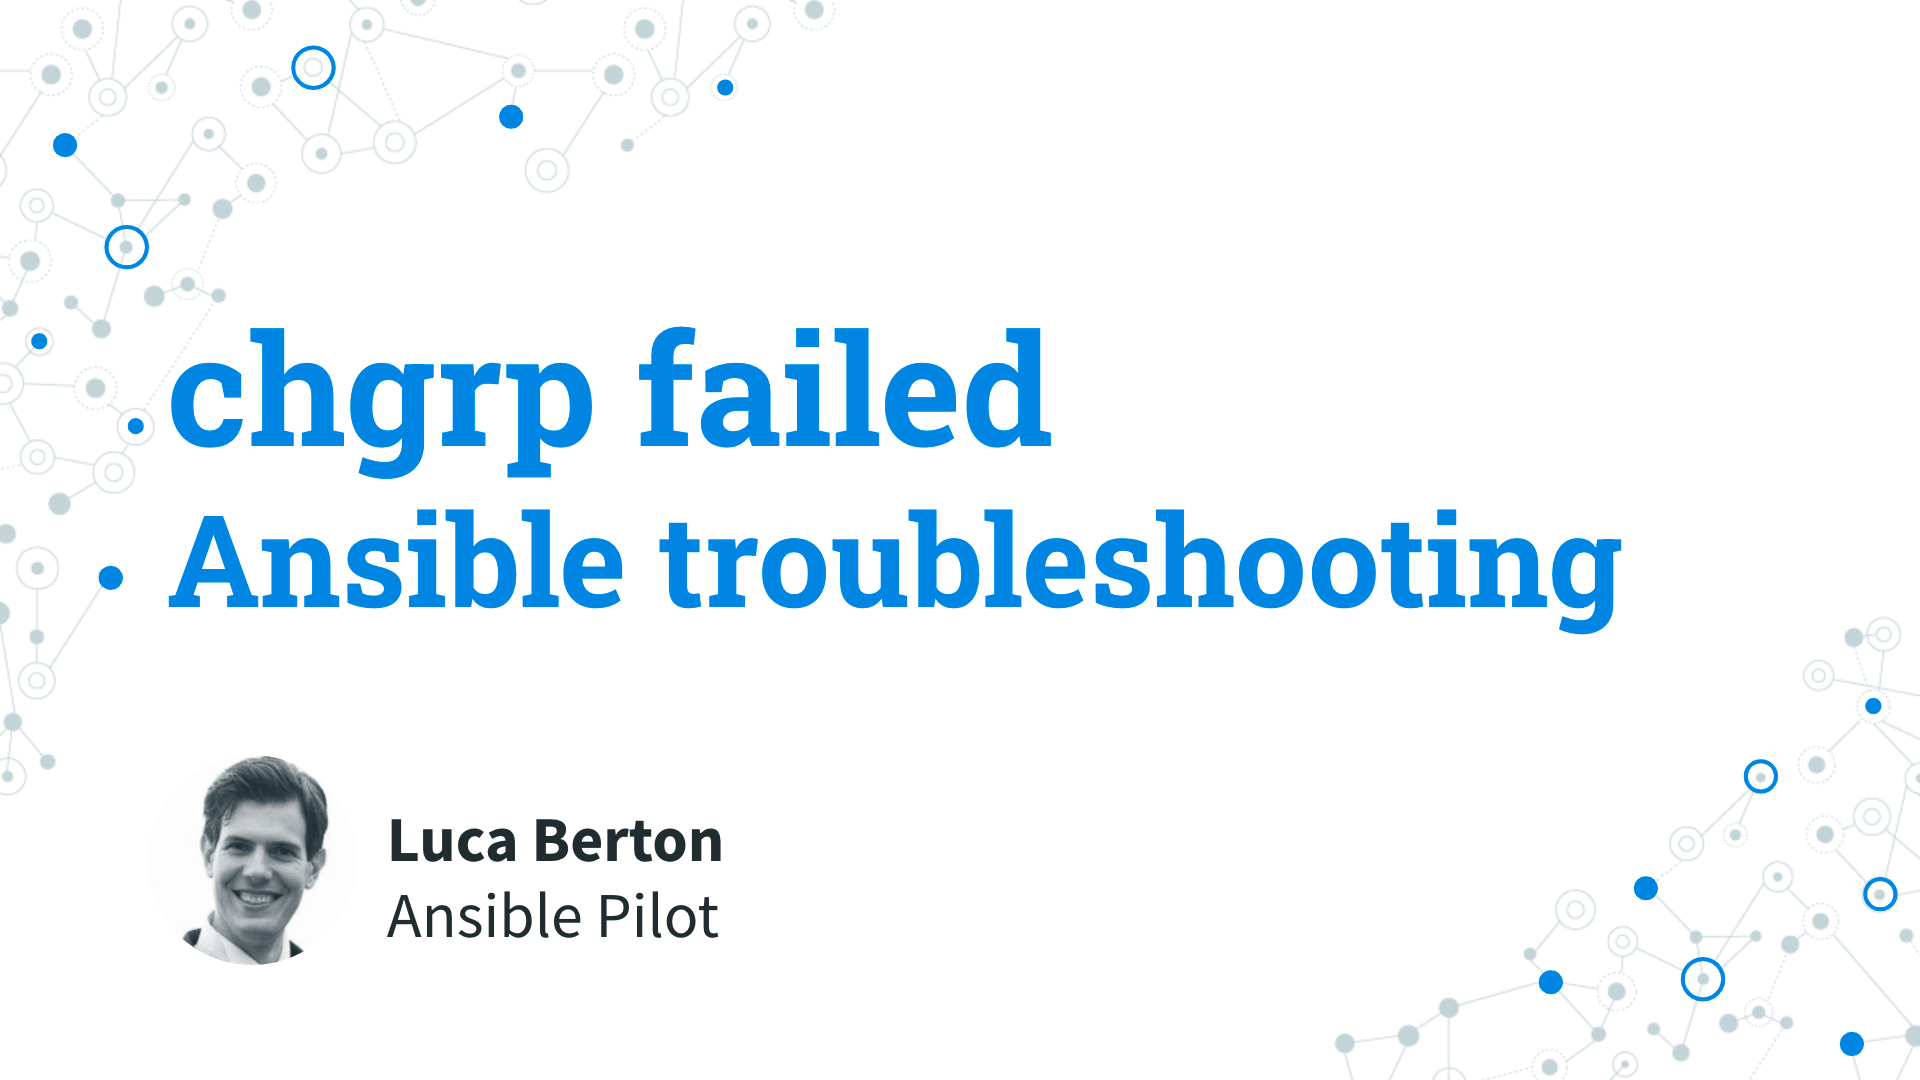 Ansible troubleshooting - chgrp failed